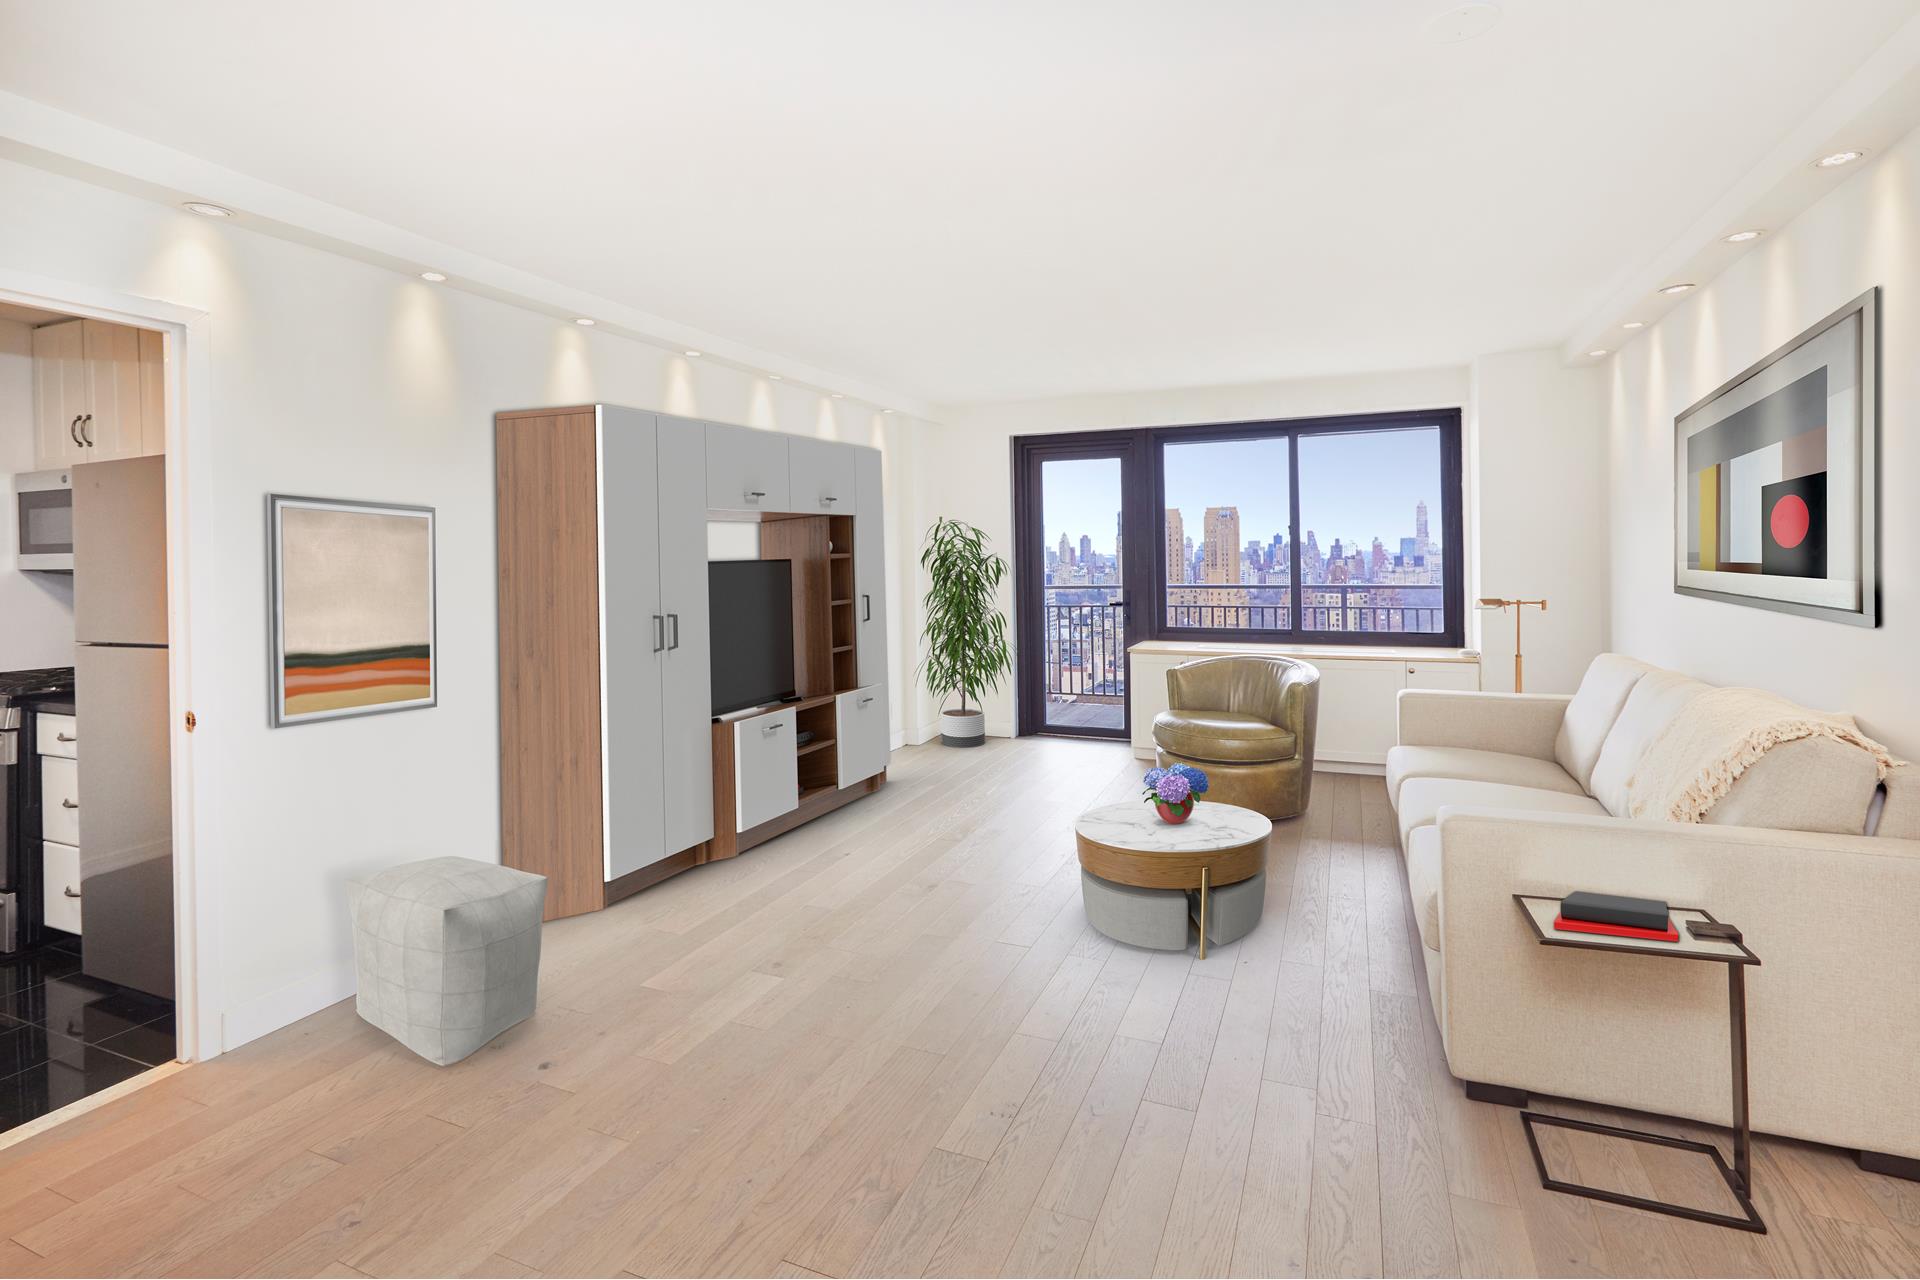 201 West 70th Street 33G, Lincoln Sq, Upper West Side, NYC - 1 Bedrooms  
1 Bathrooms  
3 Rooms - 